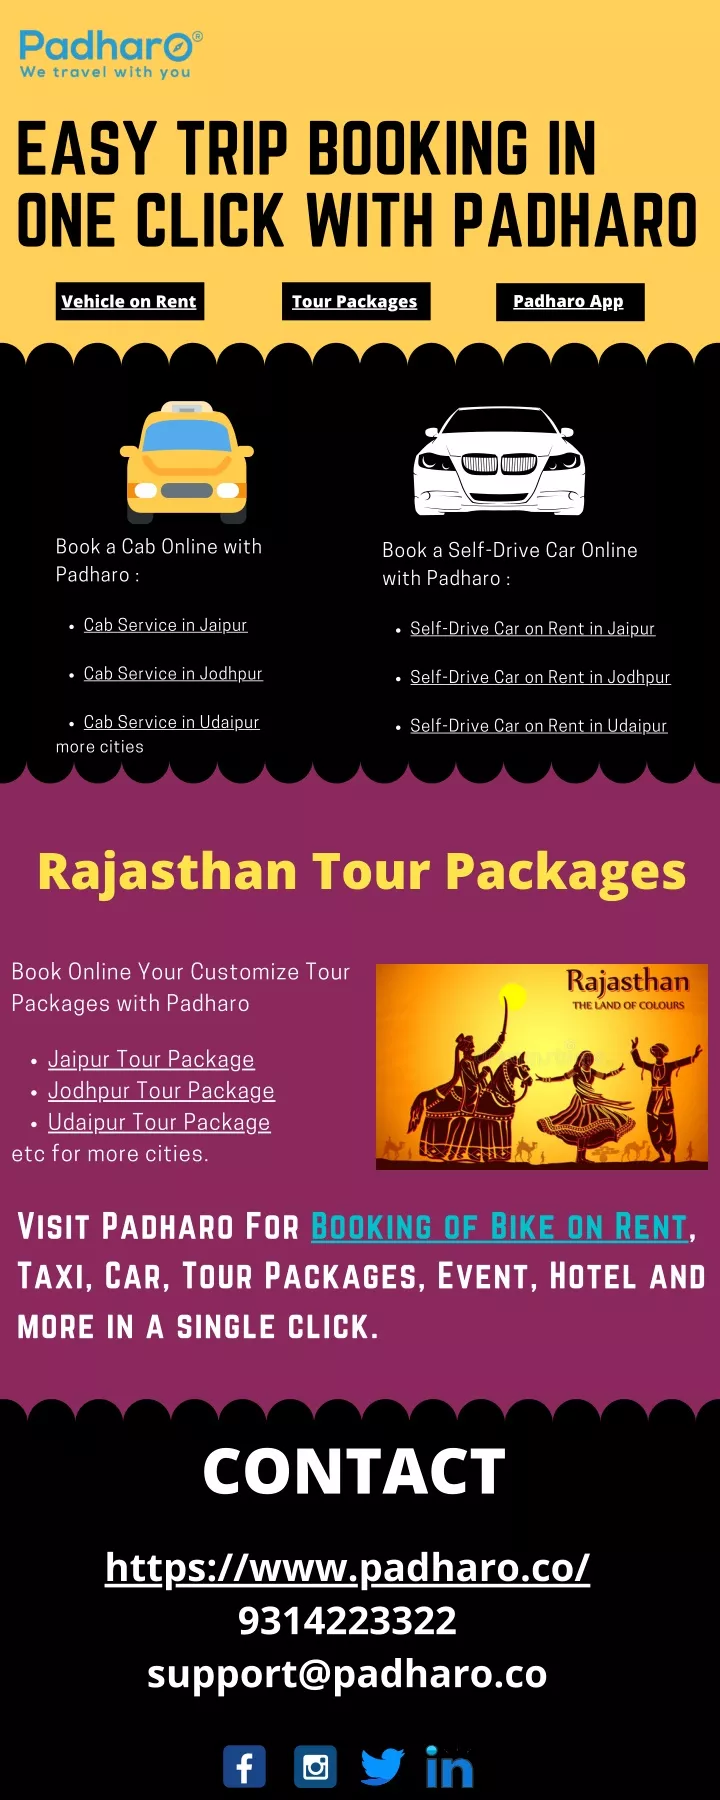 easy trip booking in one click with padharo